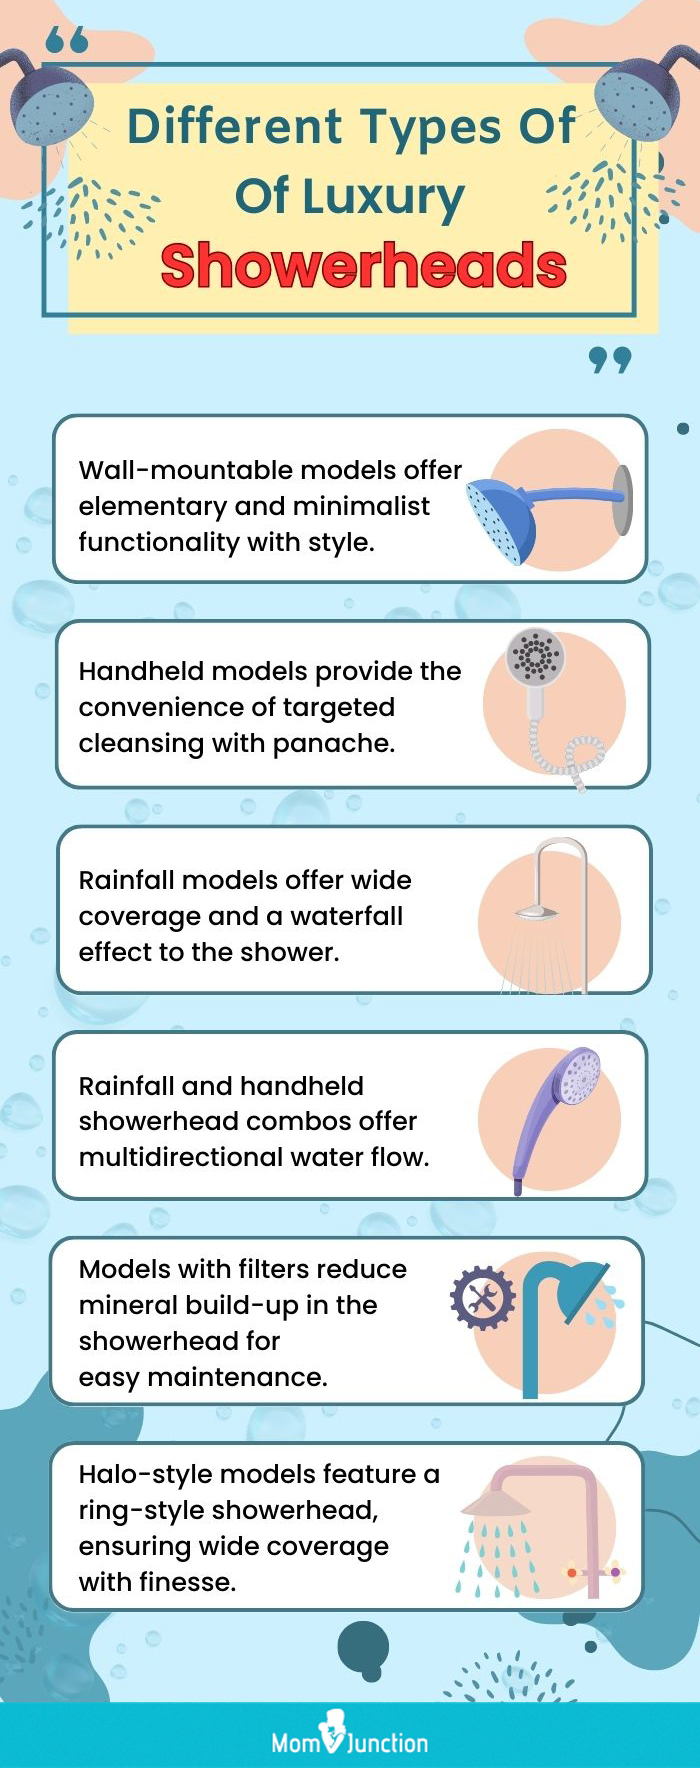 Different Types Of Luxury Showerheads (infographic)